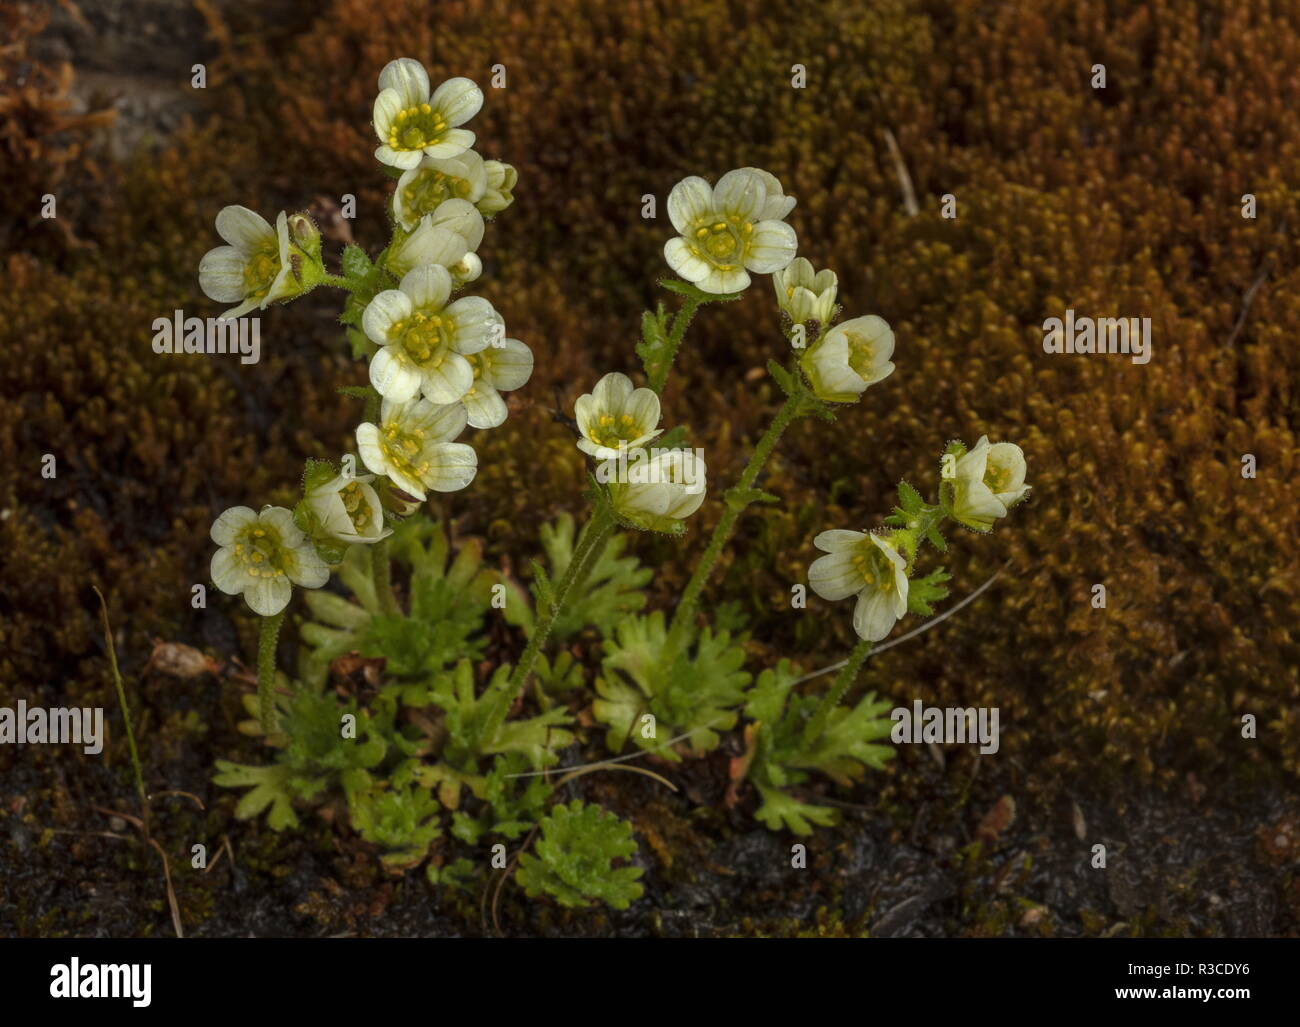 Tufted saxifrage, Saxifraga cespitosa in flower. Very rare in uk. Stock Photo